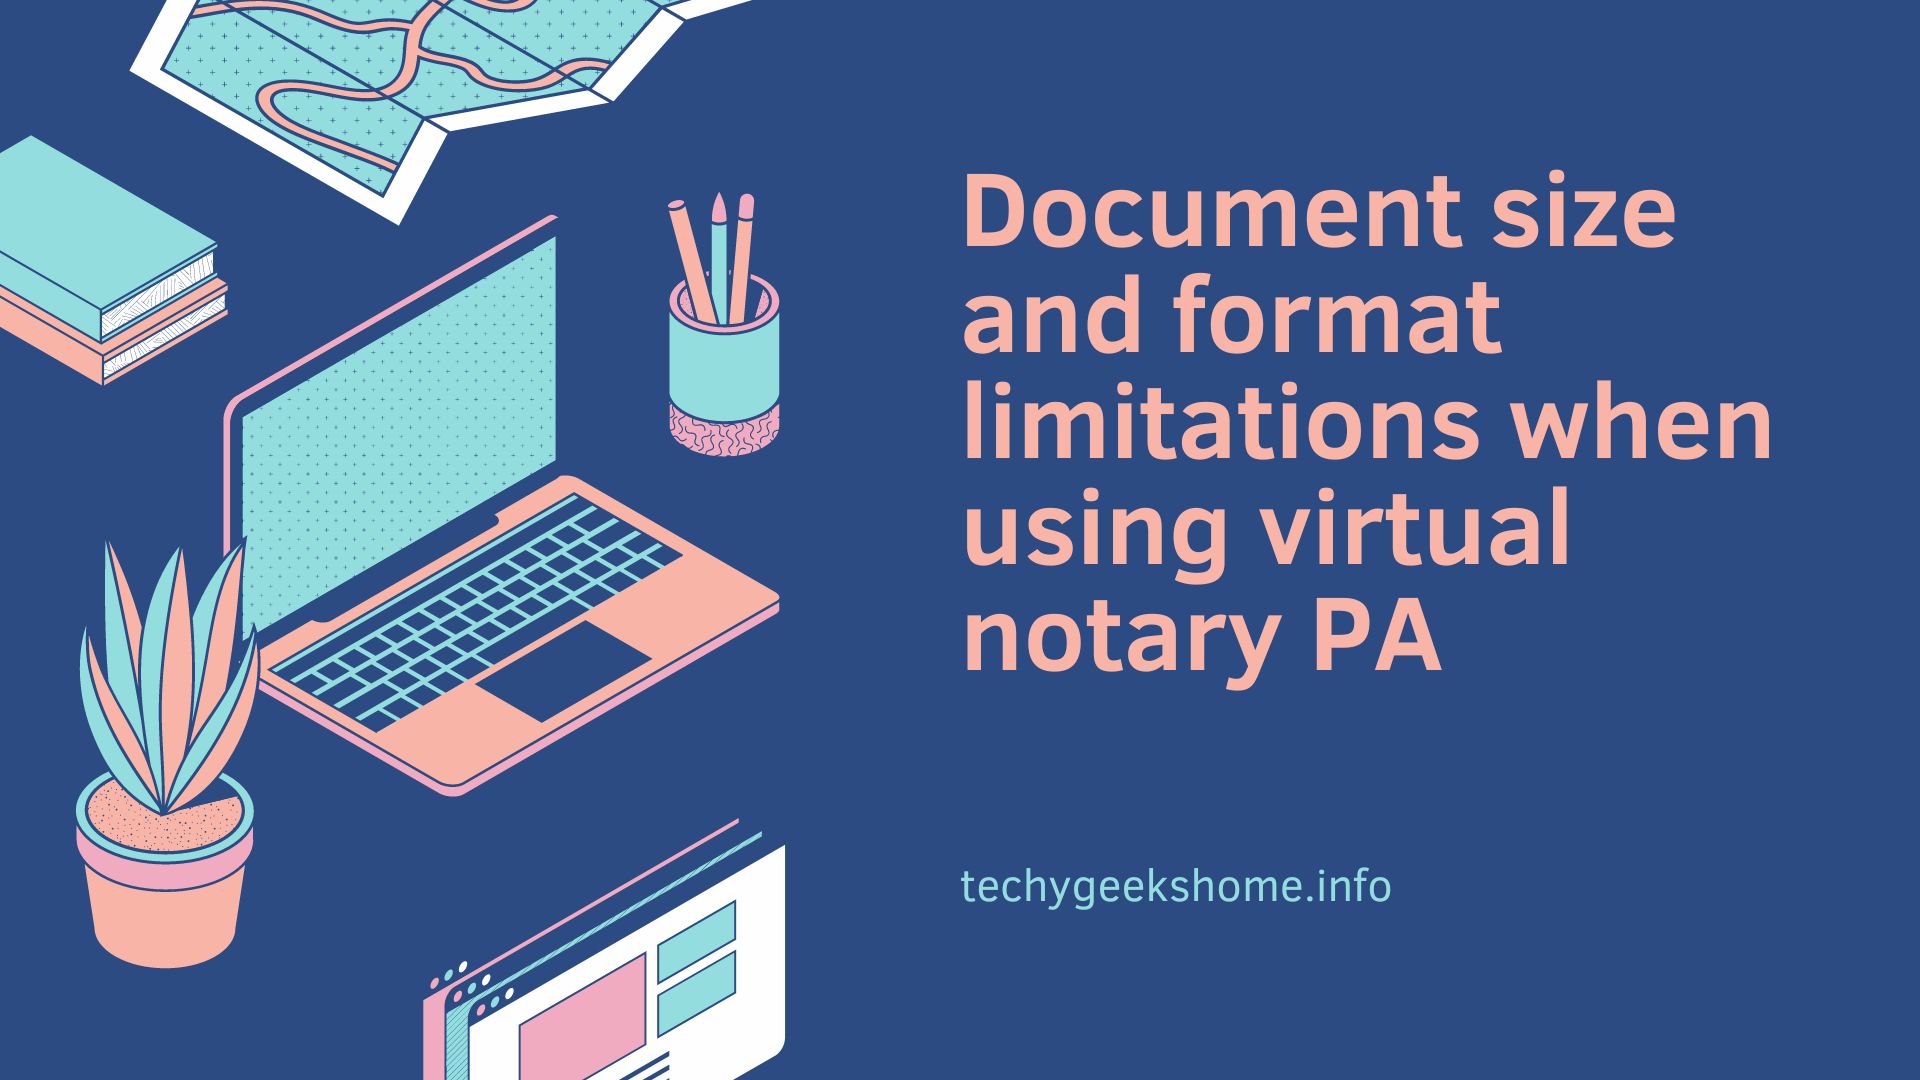 Document size and format limitations when using virtual notary PA